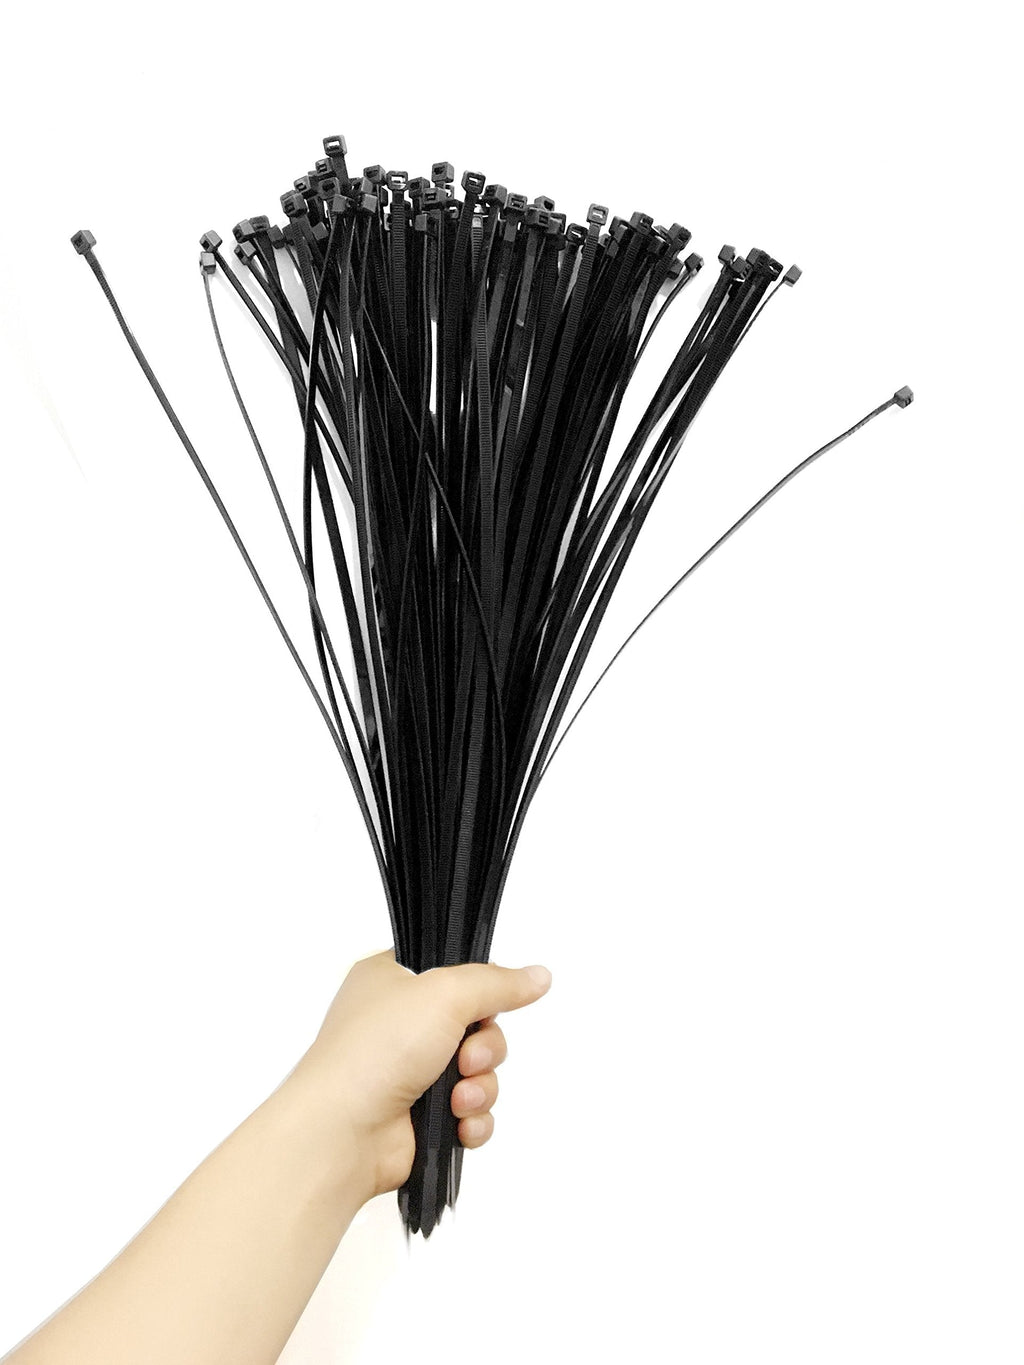  [AUSTRALIA] - NewNewStar 14.6" 100Pack Heavy Duty Nylon Cable Zip Ties, 50 lb Test, 4.8mm Wide and 370mm Long (Black) 100Pack 4.8mm*370mm Black